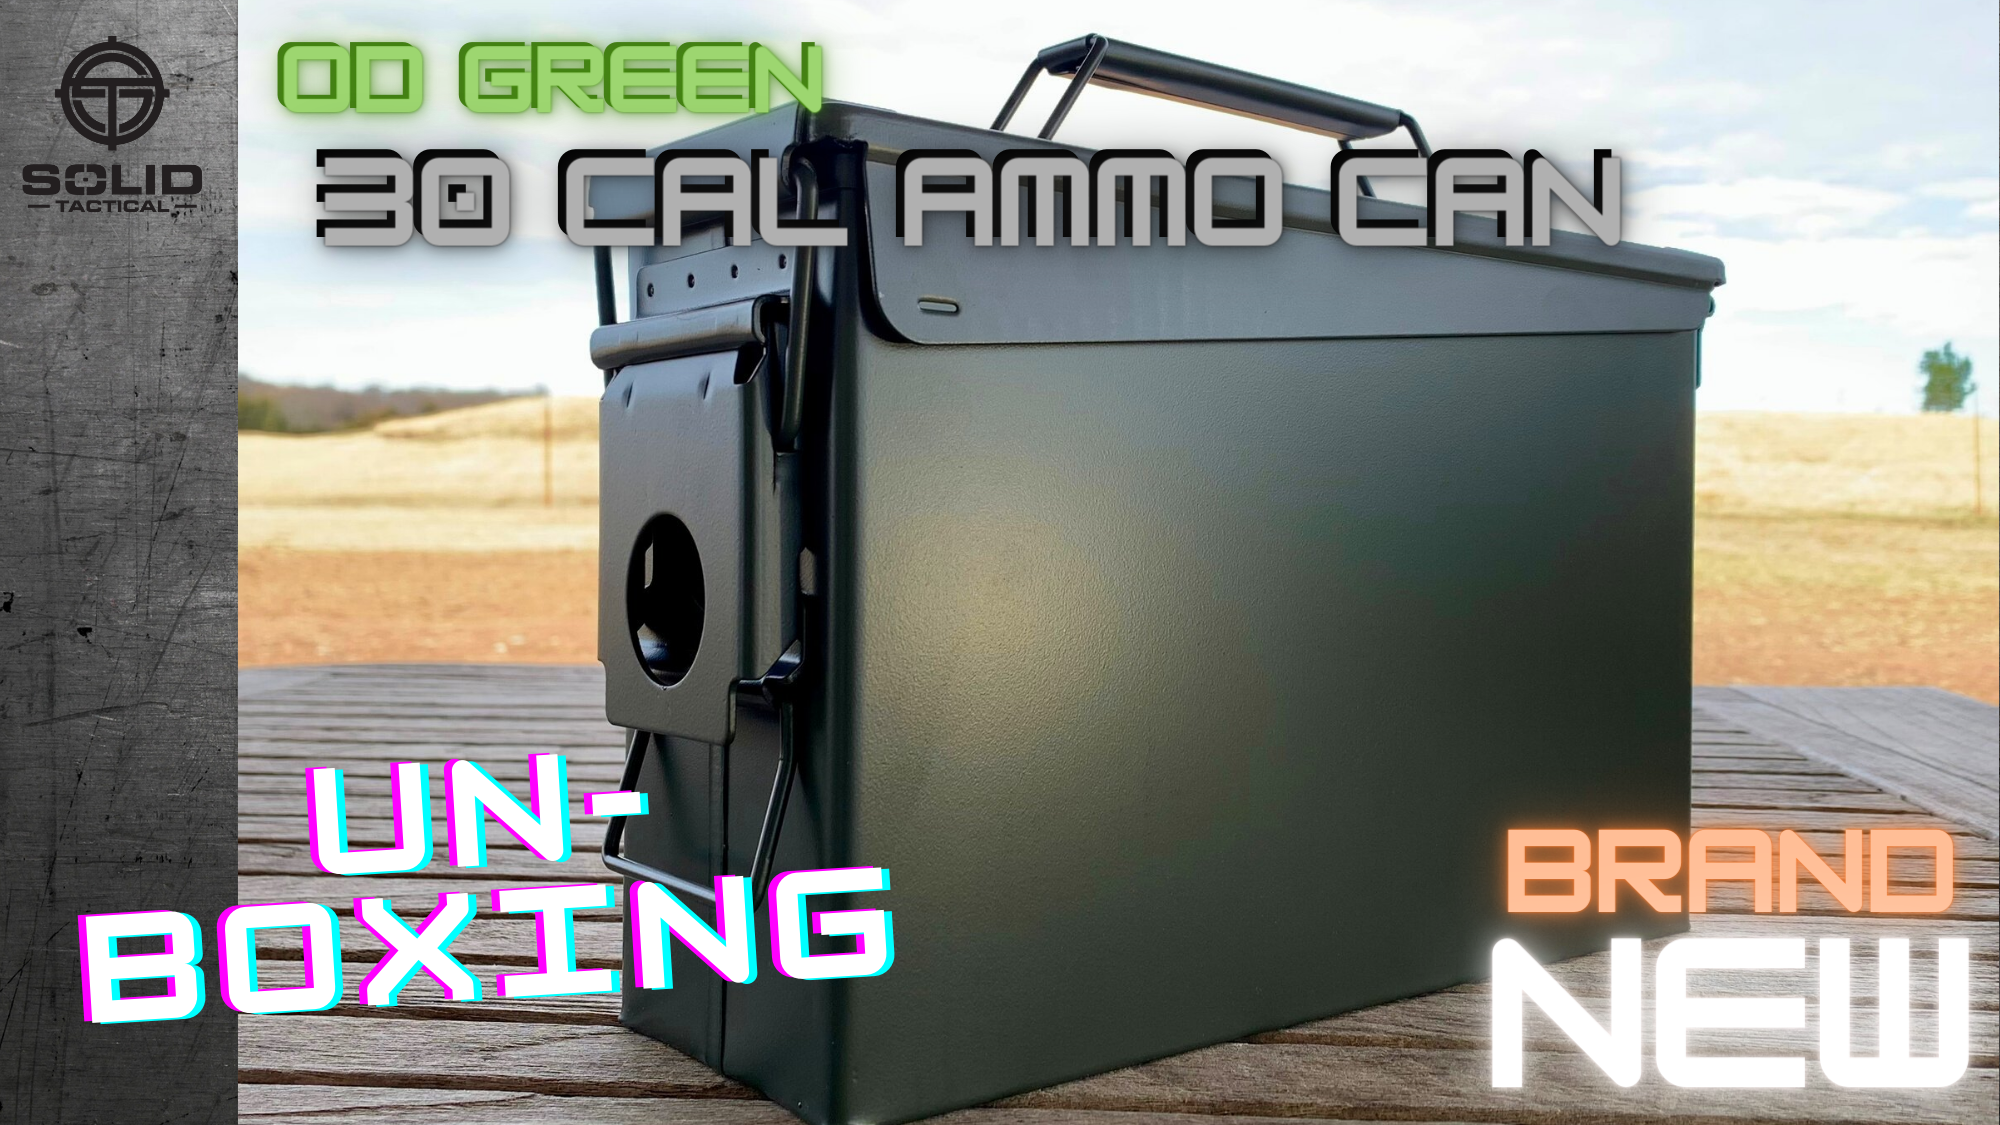 6 pack - New M19A1 30 cal Ammo Cans